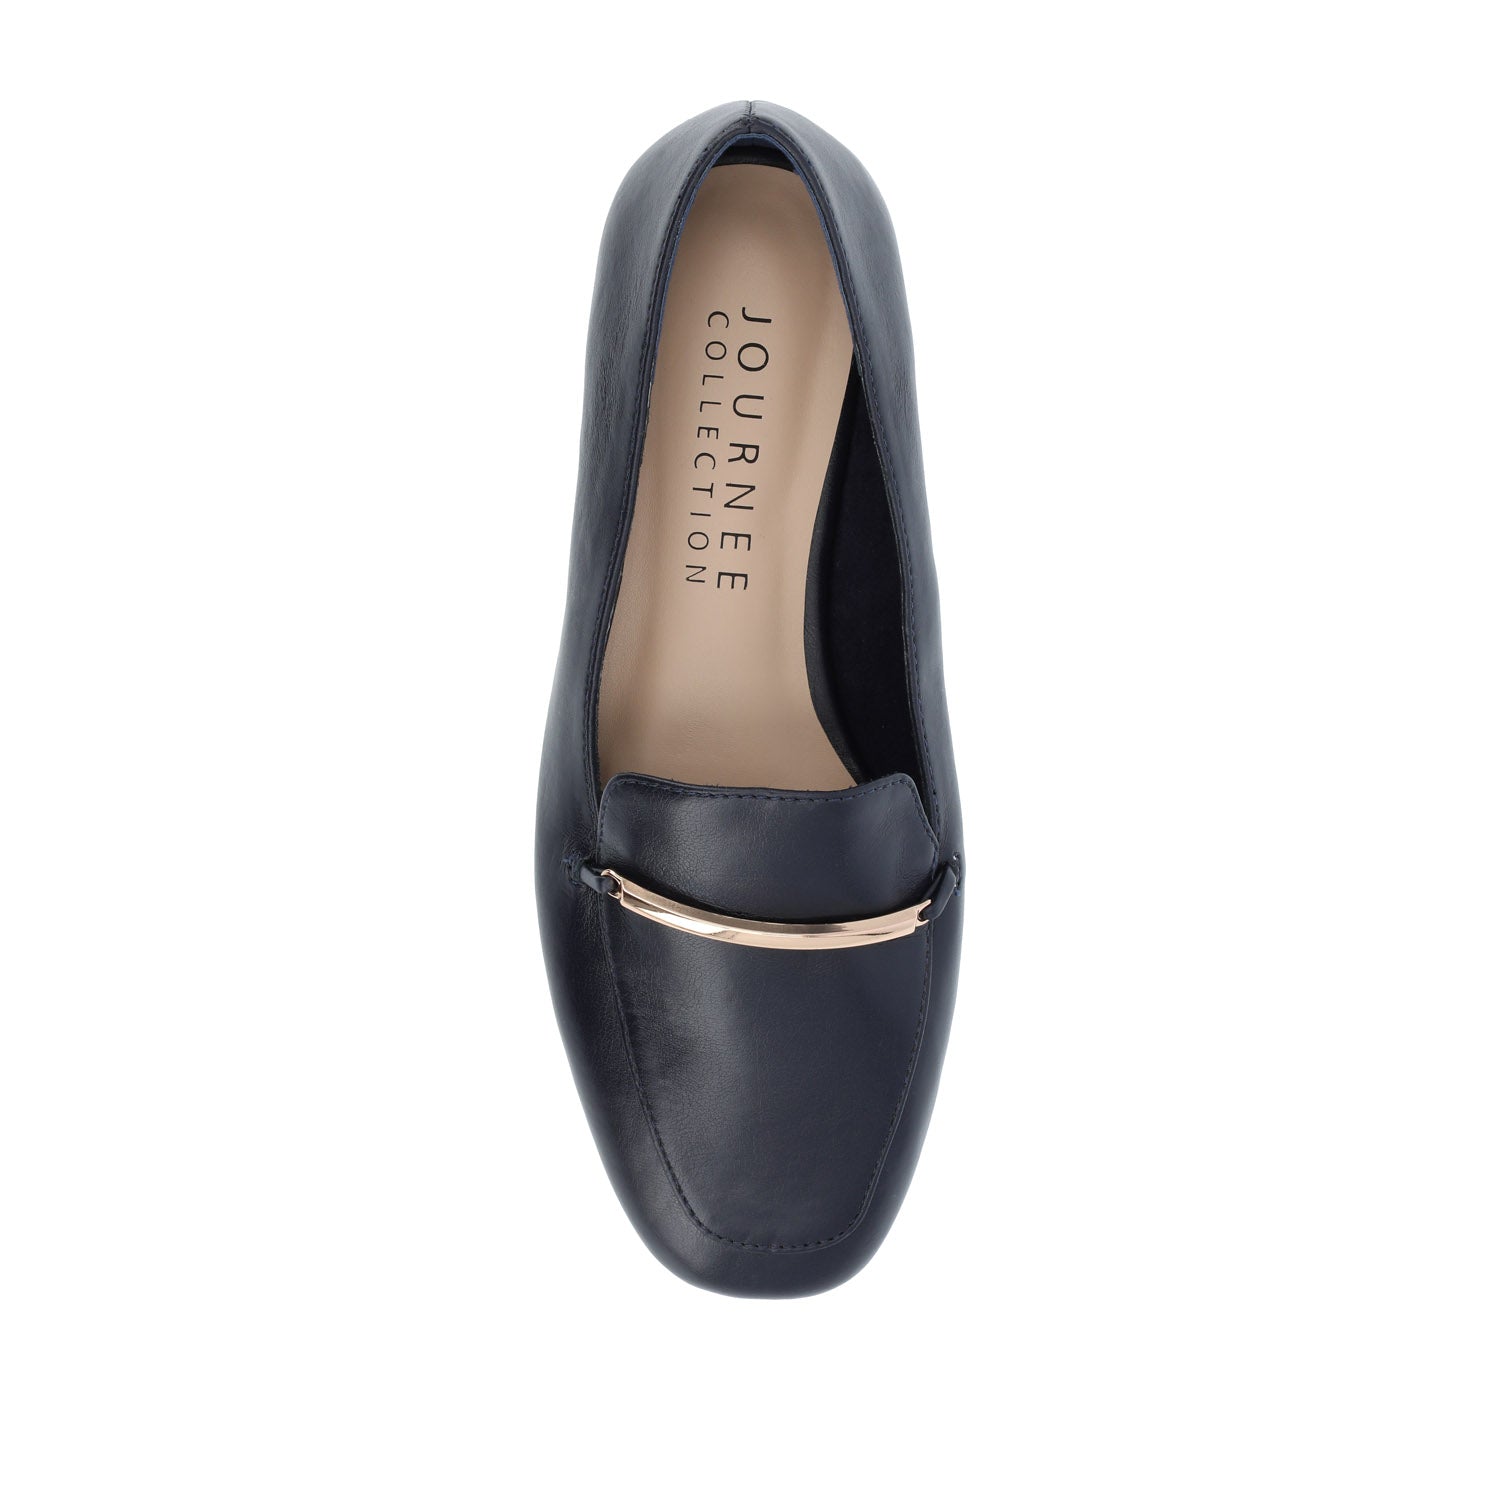 WRENN LOAFER FLATS IN FAUX LEATHER